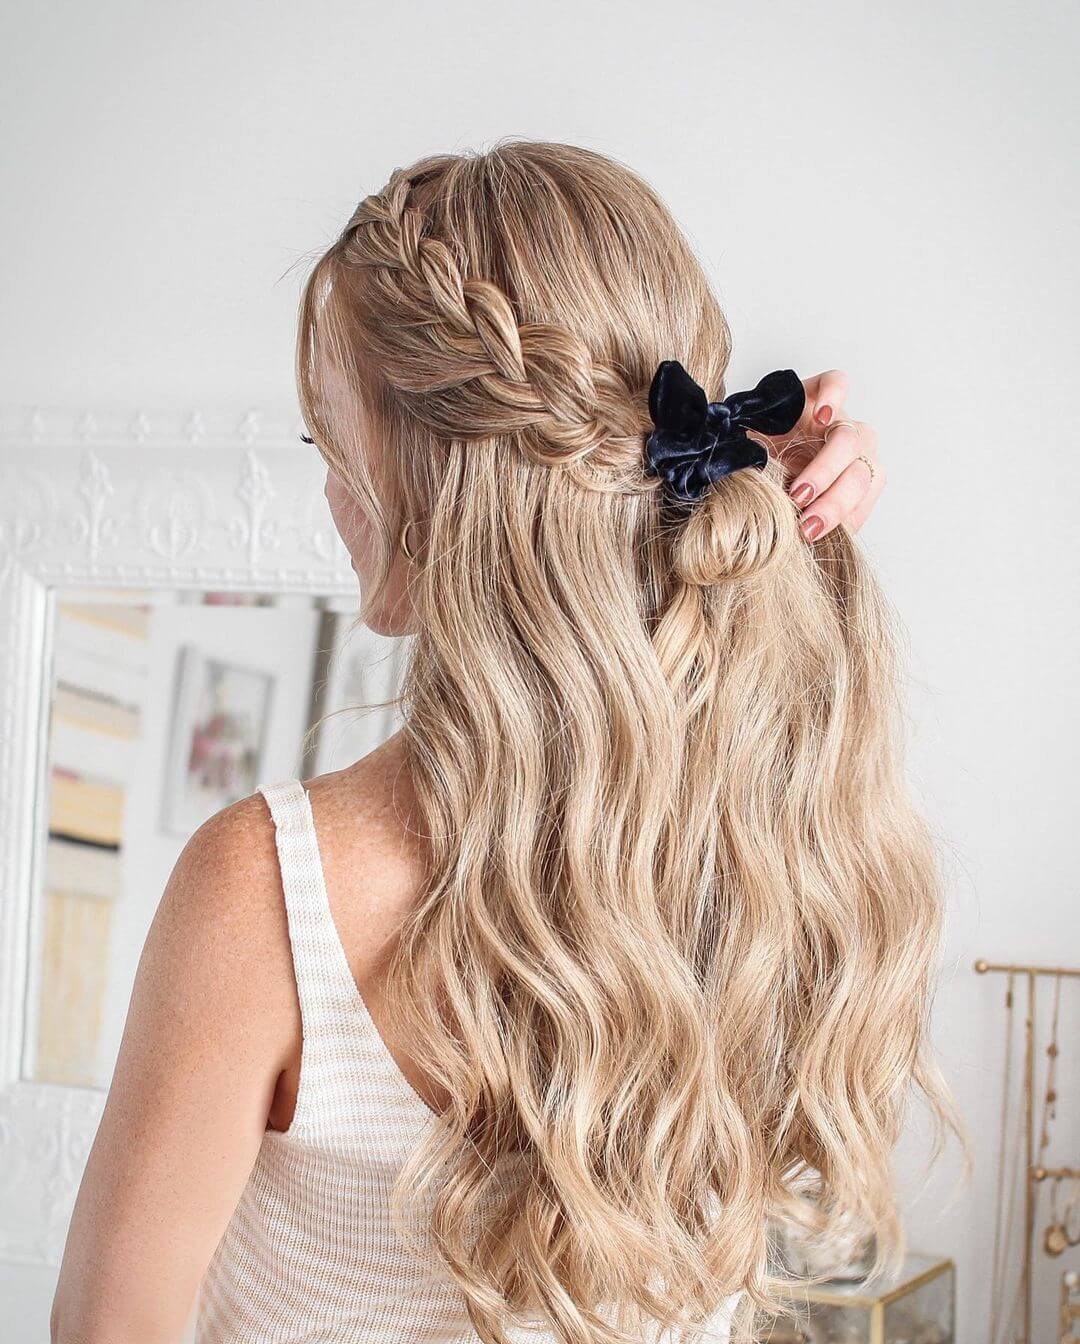 Loose braid styled with a bow